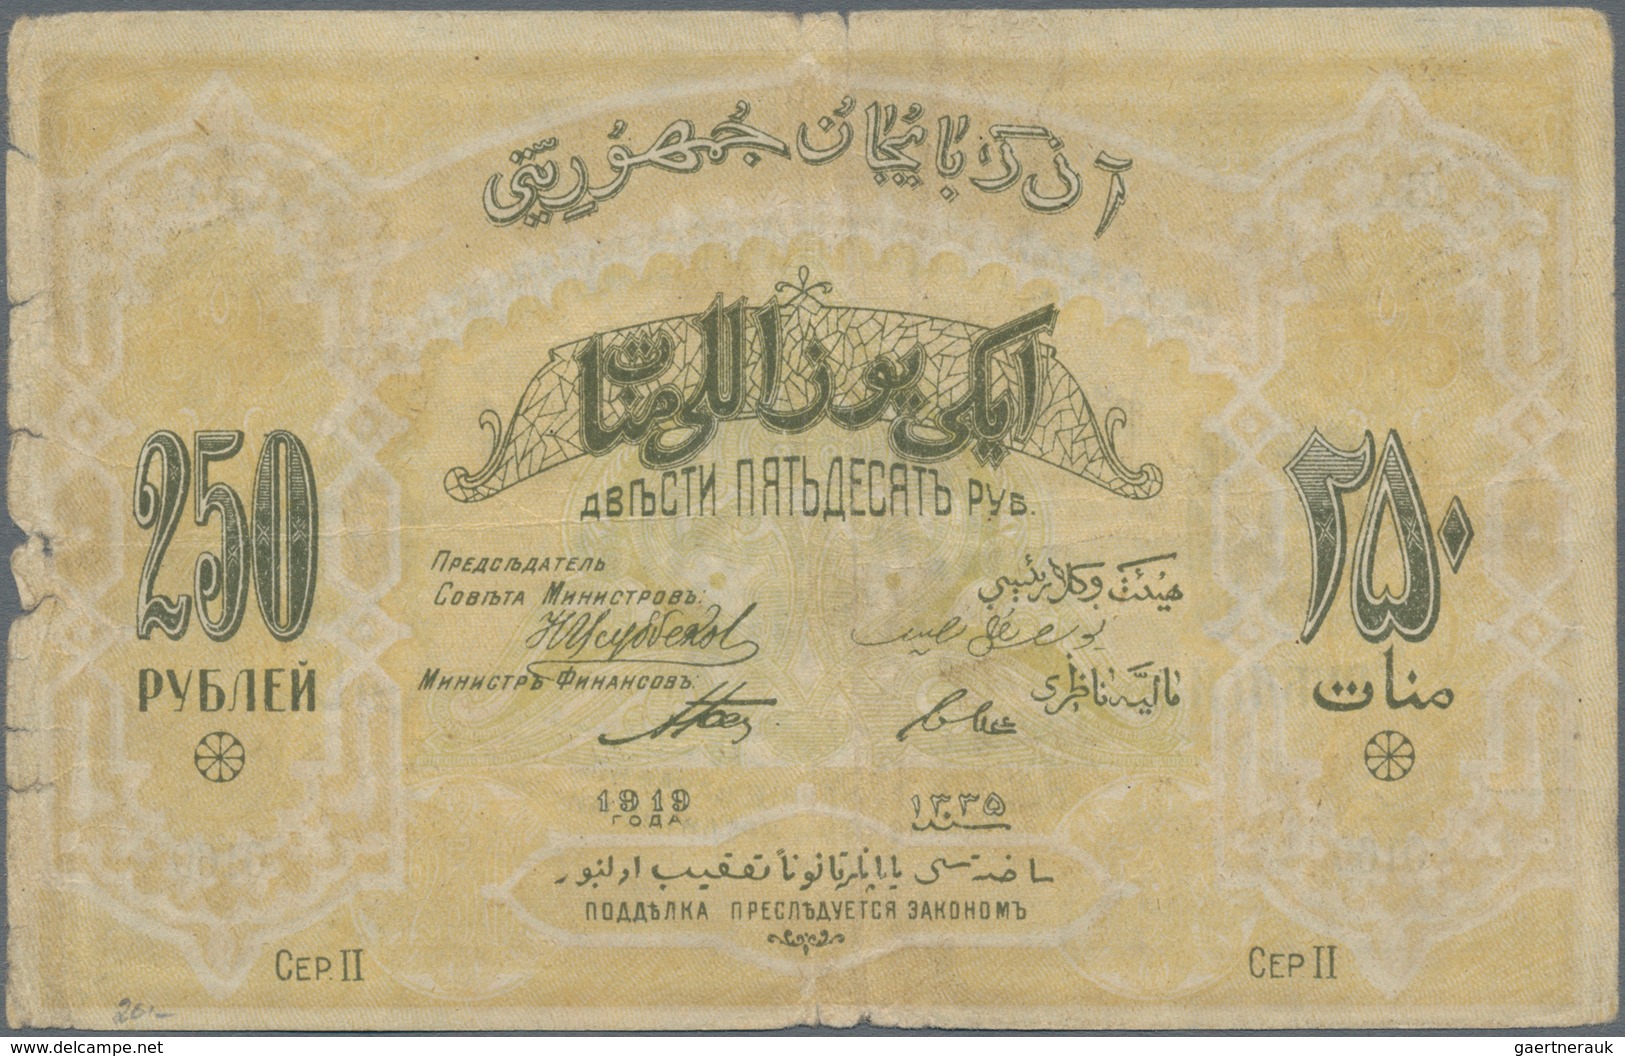 Armenia / Armenien: Set with 4 banknotes Armenia and Azerbaijan with 50, 100, 250 and 500 Rubles P.3